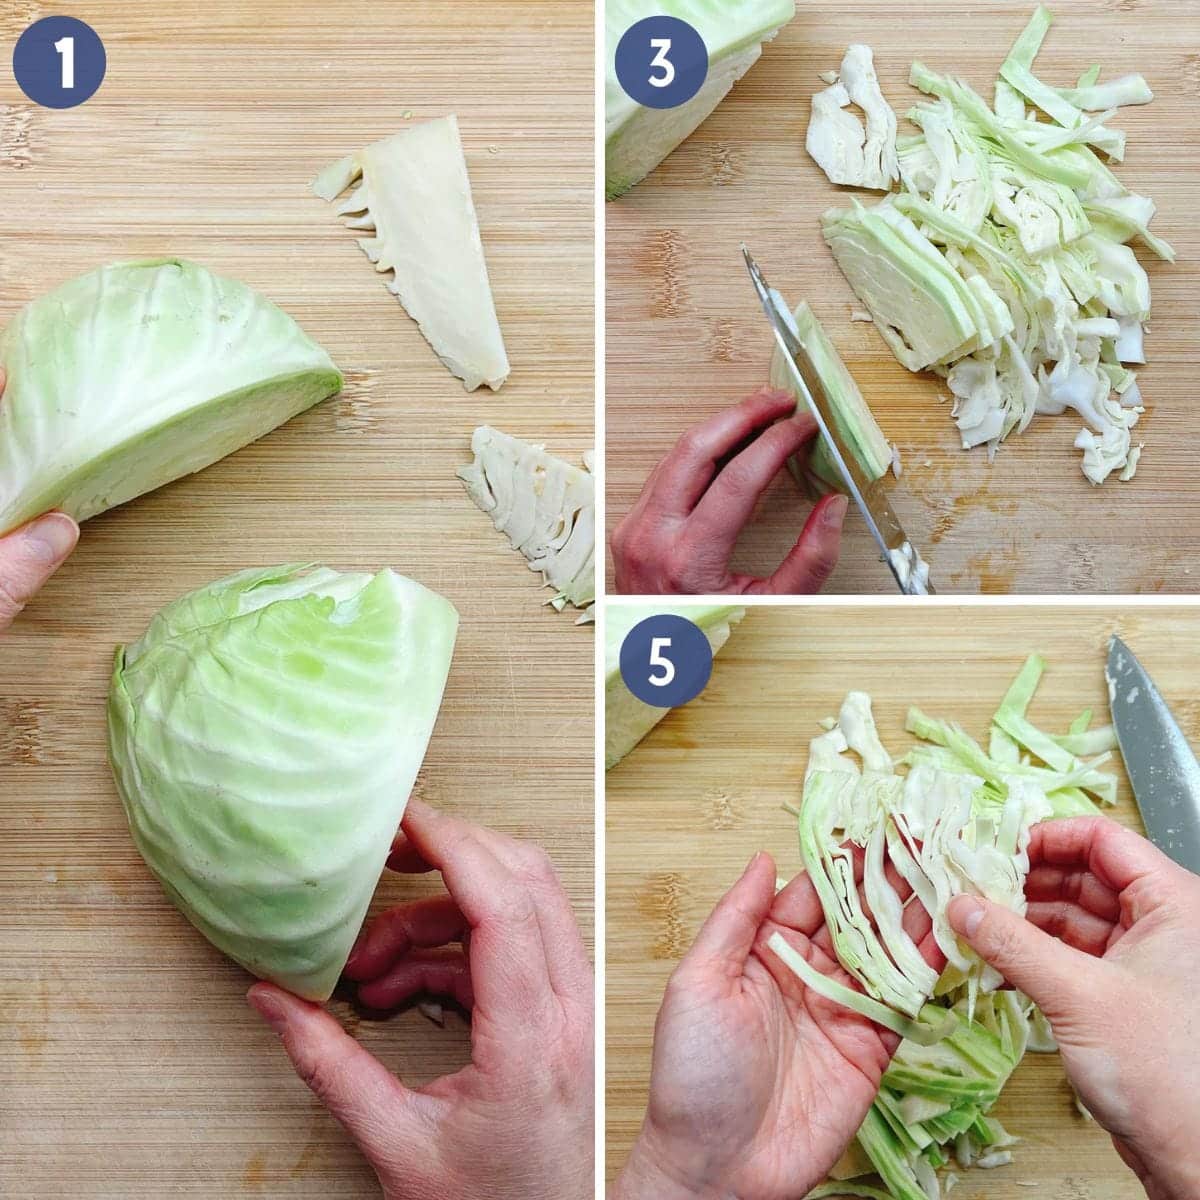 Person demos how to slice green cabbage for stir fry uses.